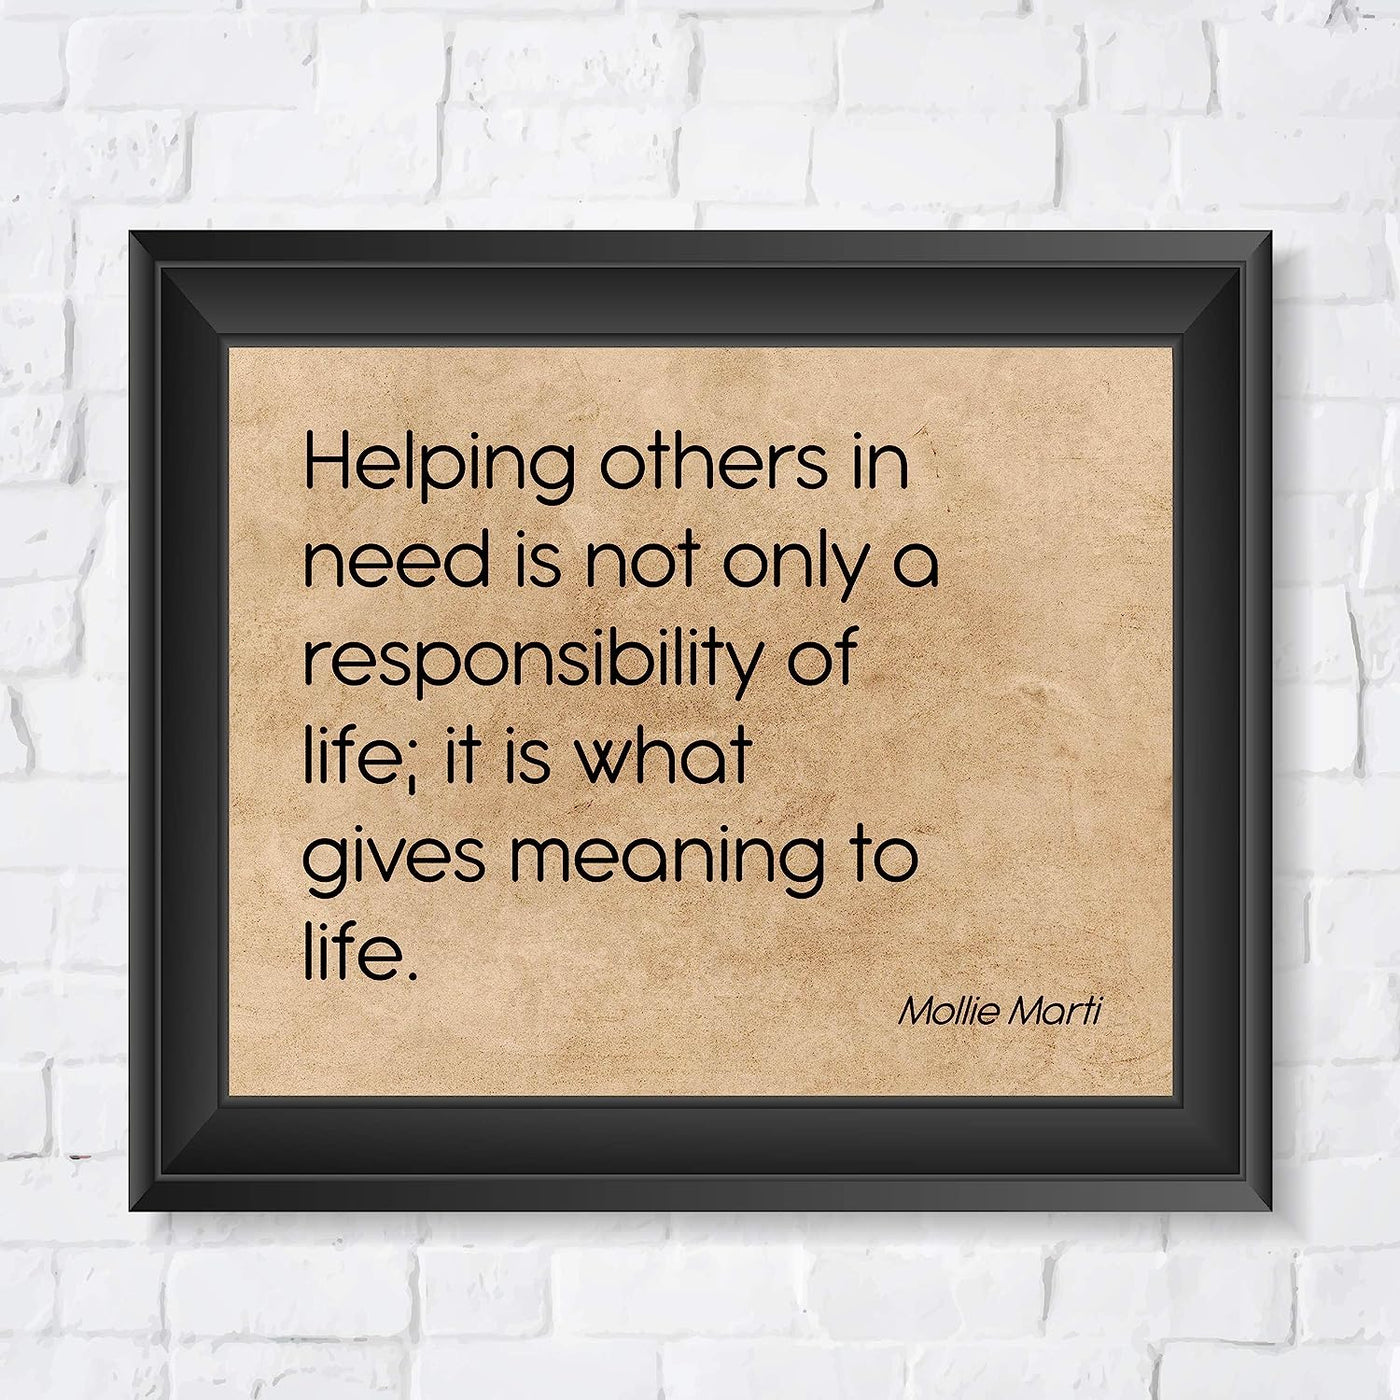 Helping Others In Need-Gives Meaning To Life Inspirational Quotes Wall Art -10x8" Distressed Typographic Poster Print-Ready to Frame. Positive Home-Office-Classroom-Christian Decor! Great Reminder!